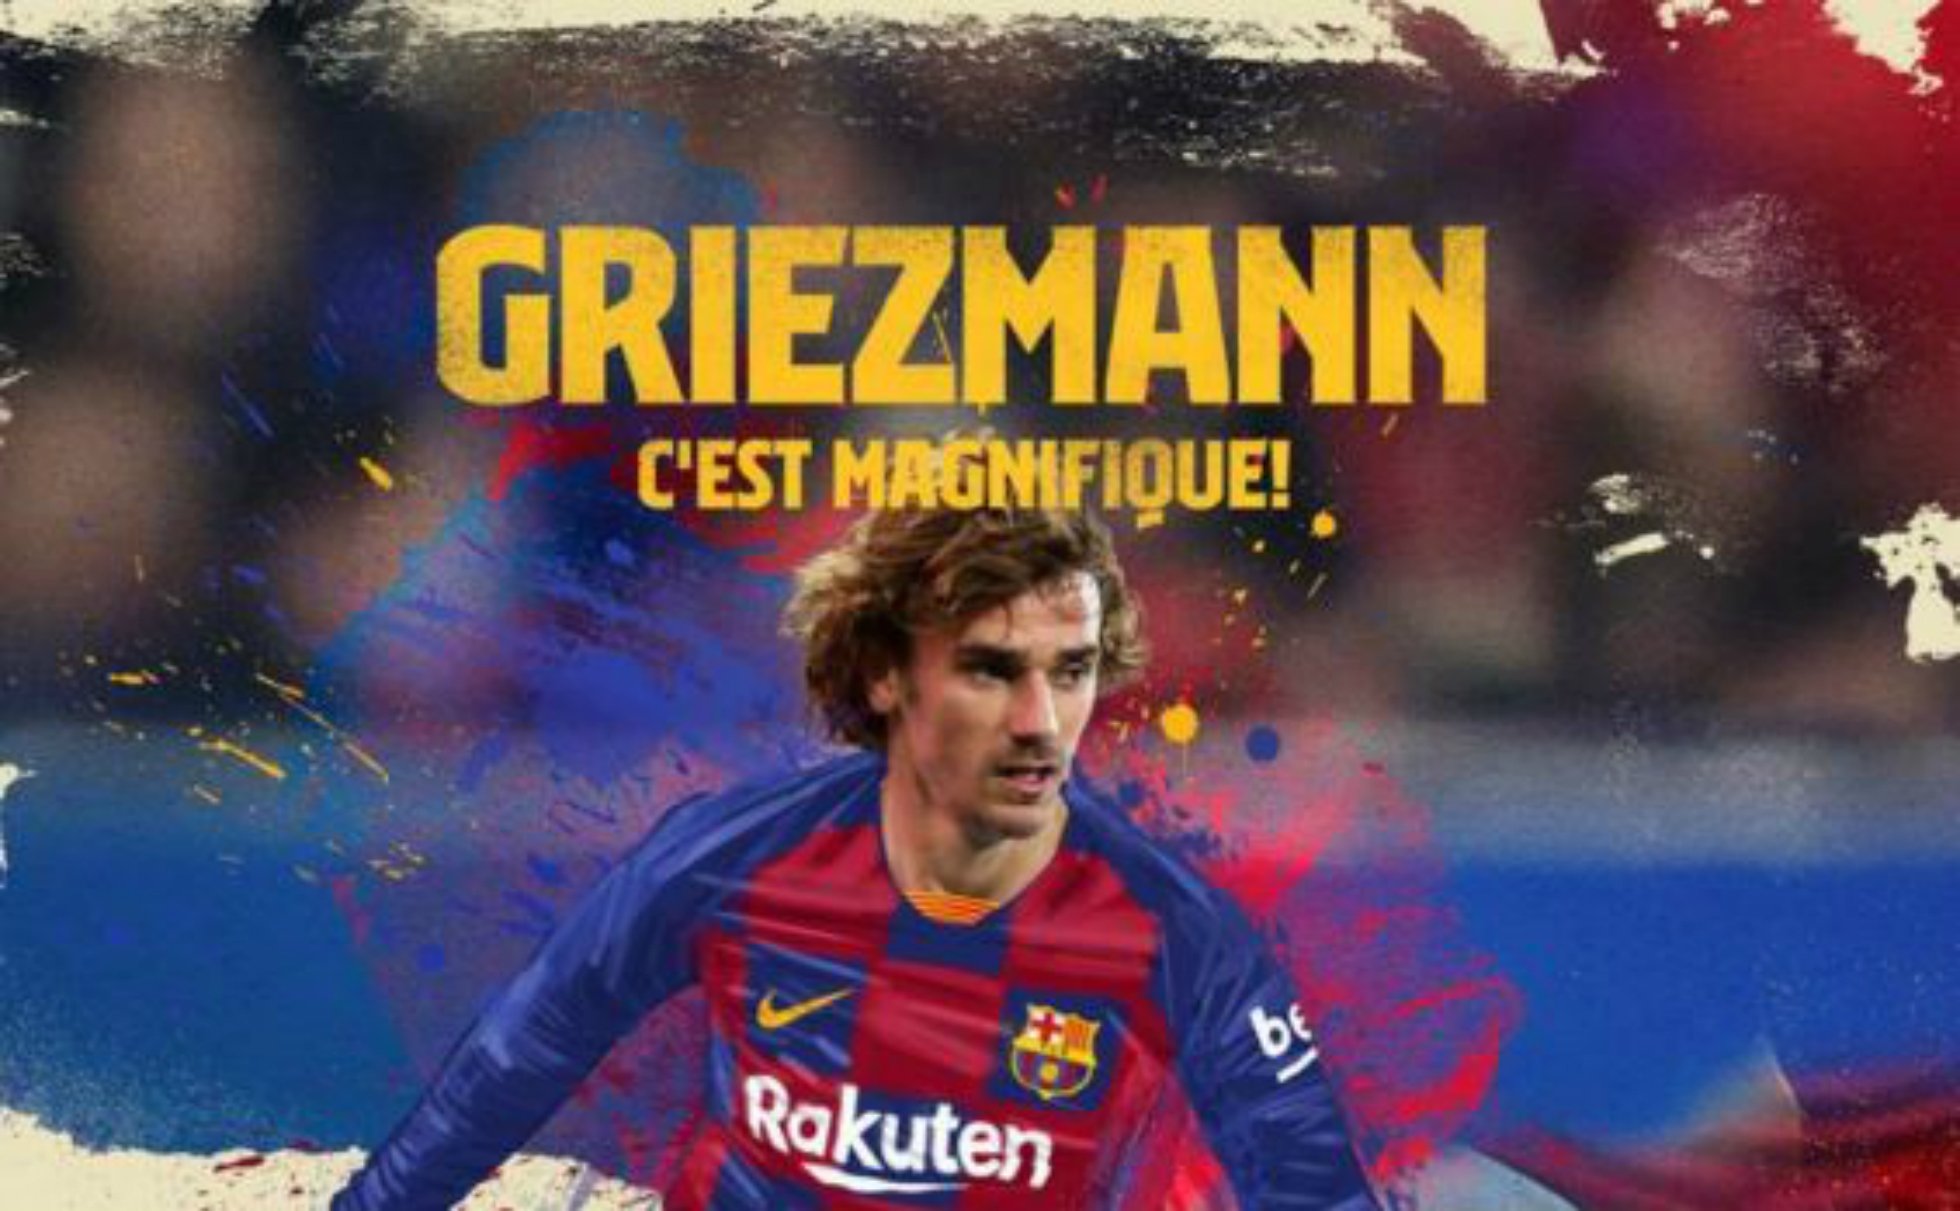 A new star to shine on Camp Nou as Griezmann finally arrives at Barça